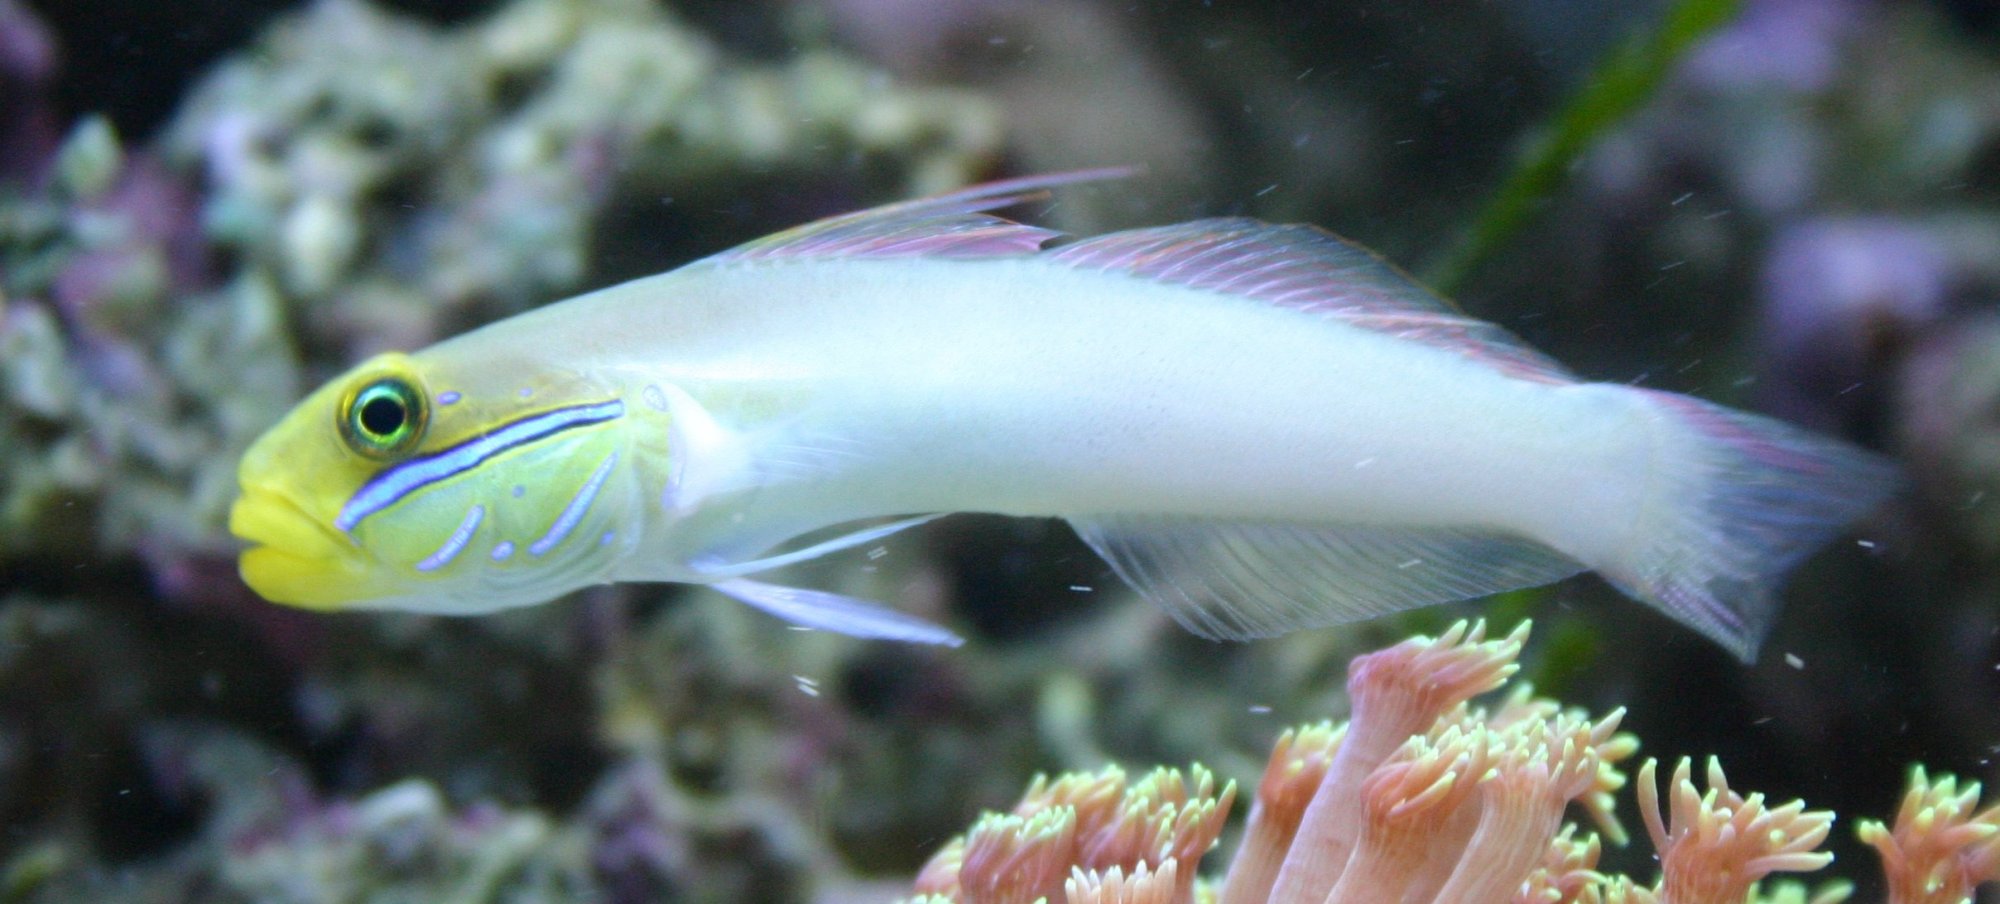 elongated pearl white body with golden face and blue flash